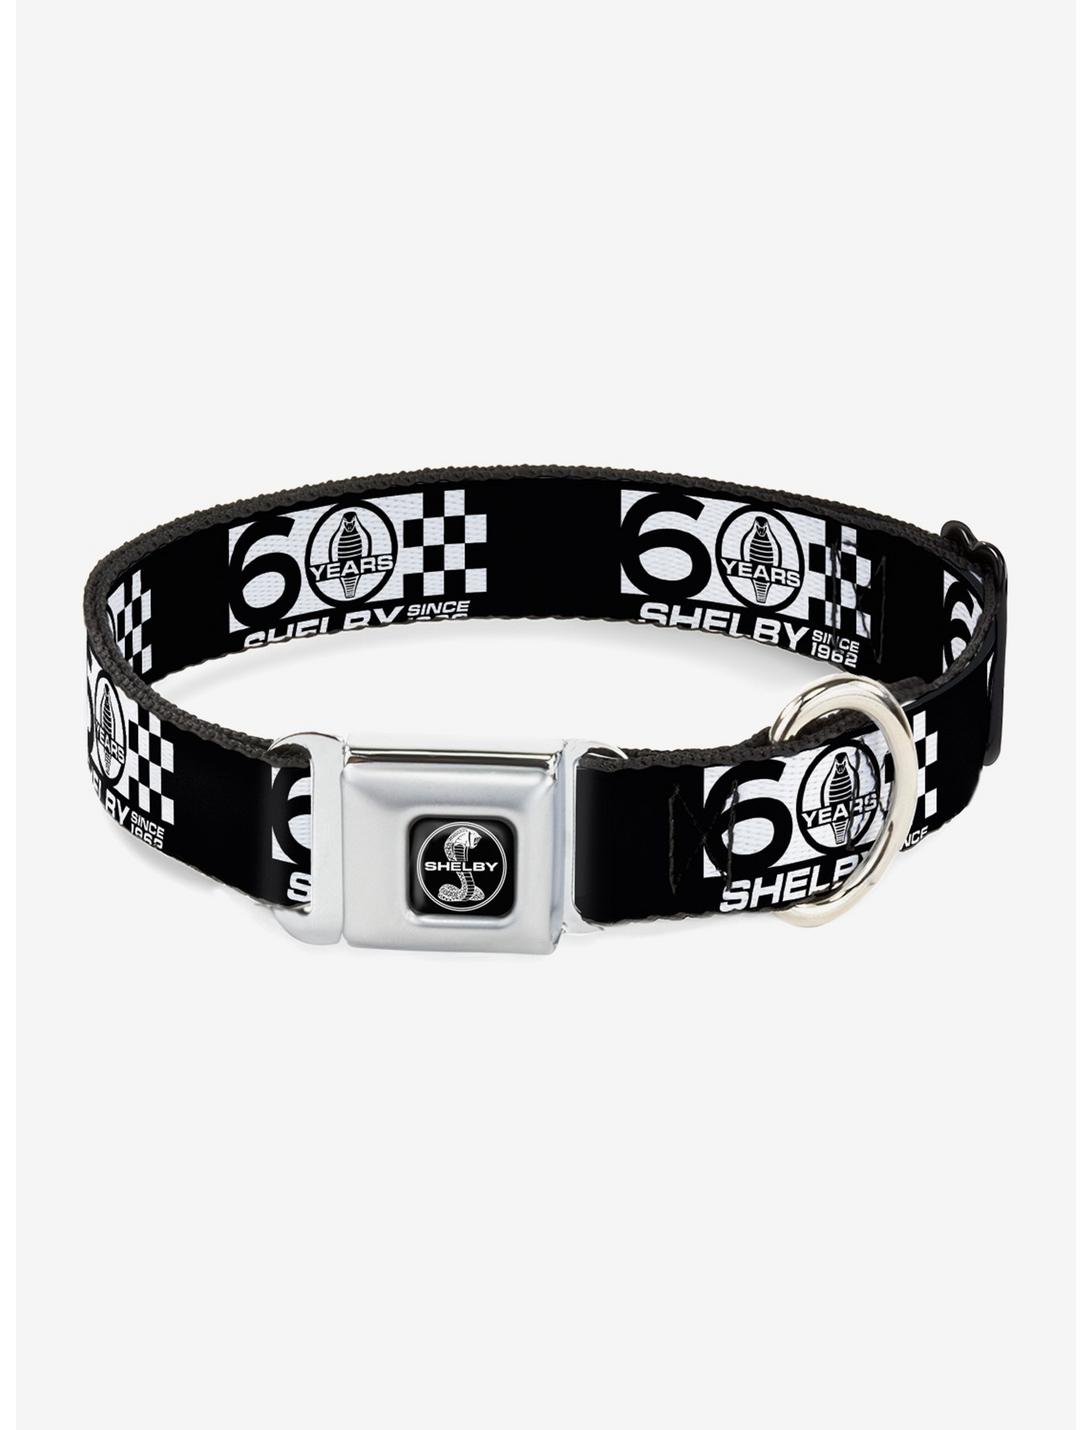 Shelby 60 Years Since 1962 Seatbelt Buckle Dog Collar, BLACK, hi-res